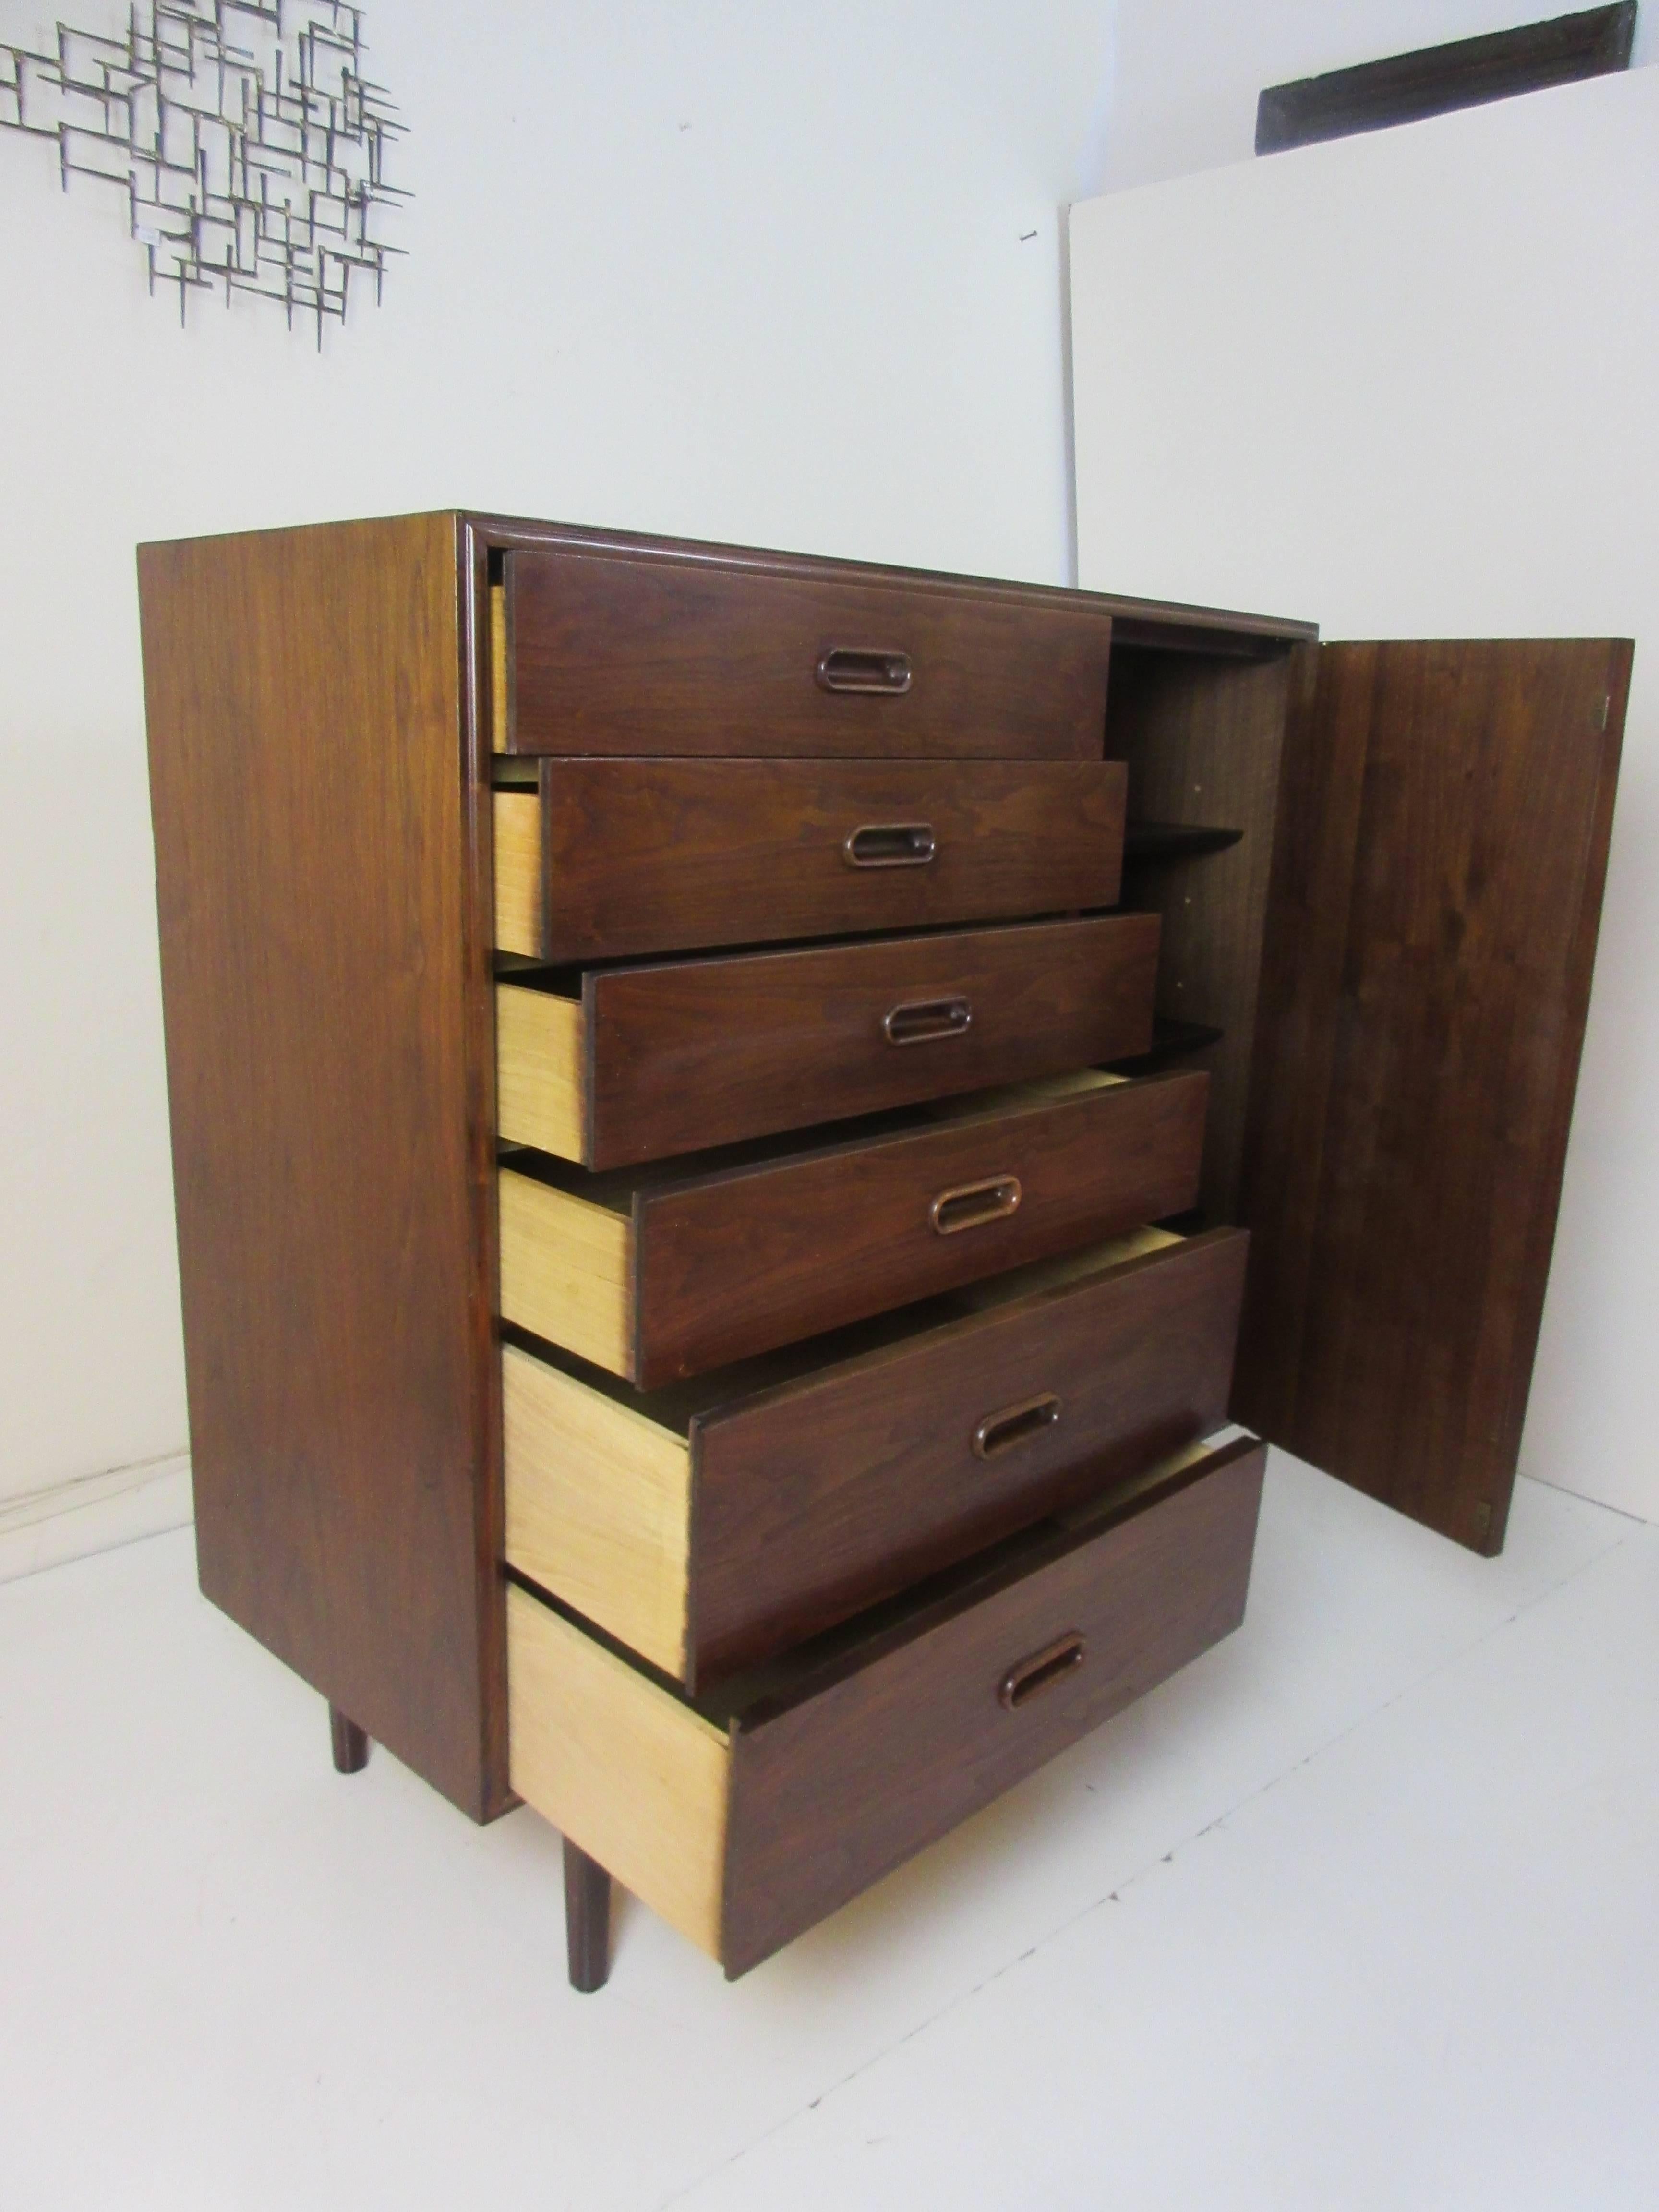 Danish teak chest with six drawers and adjustable shelving behind the door.  Right side reveals adjustable shelves perfect for bulky sweaters!